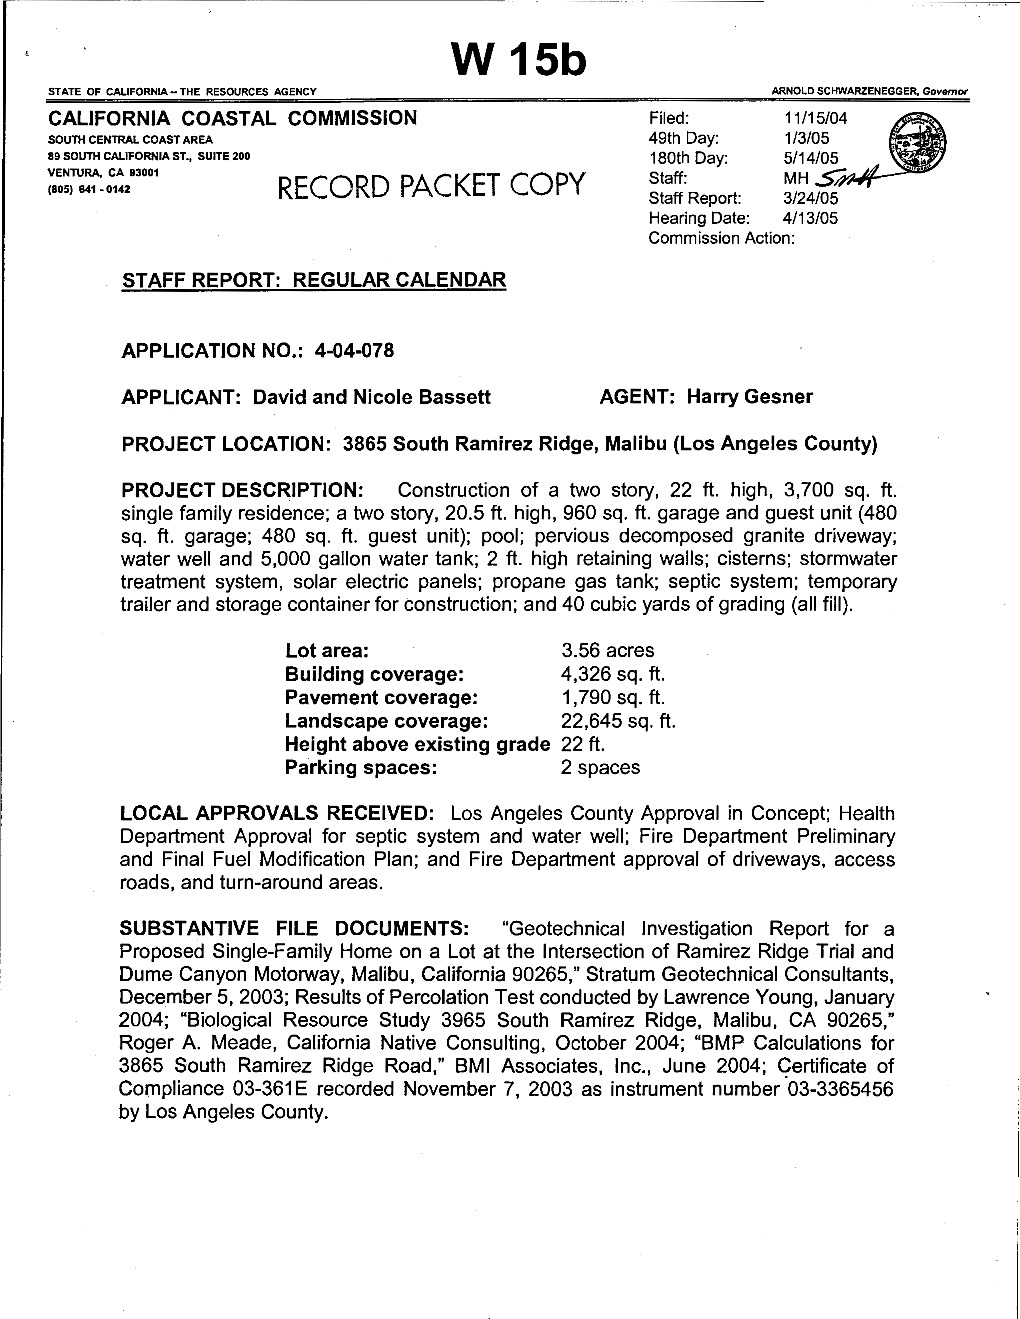 RECORD PACKET COPY Staff Report: 3/24/05 Hearing Date: 4/13/05 Commission Action